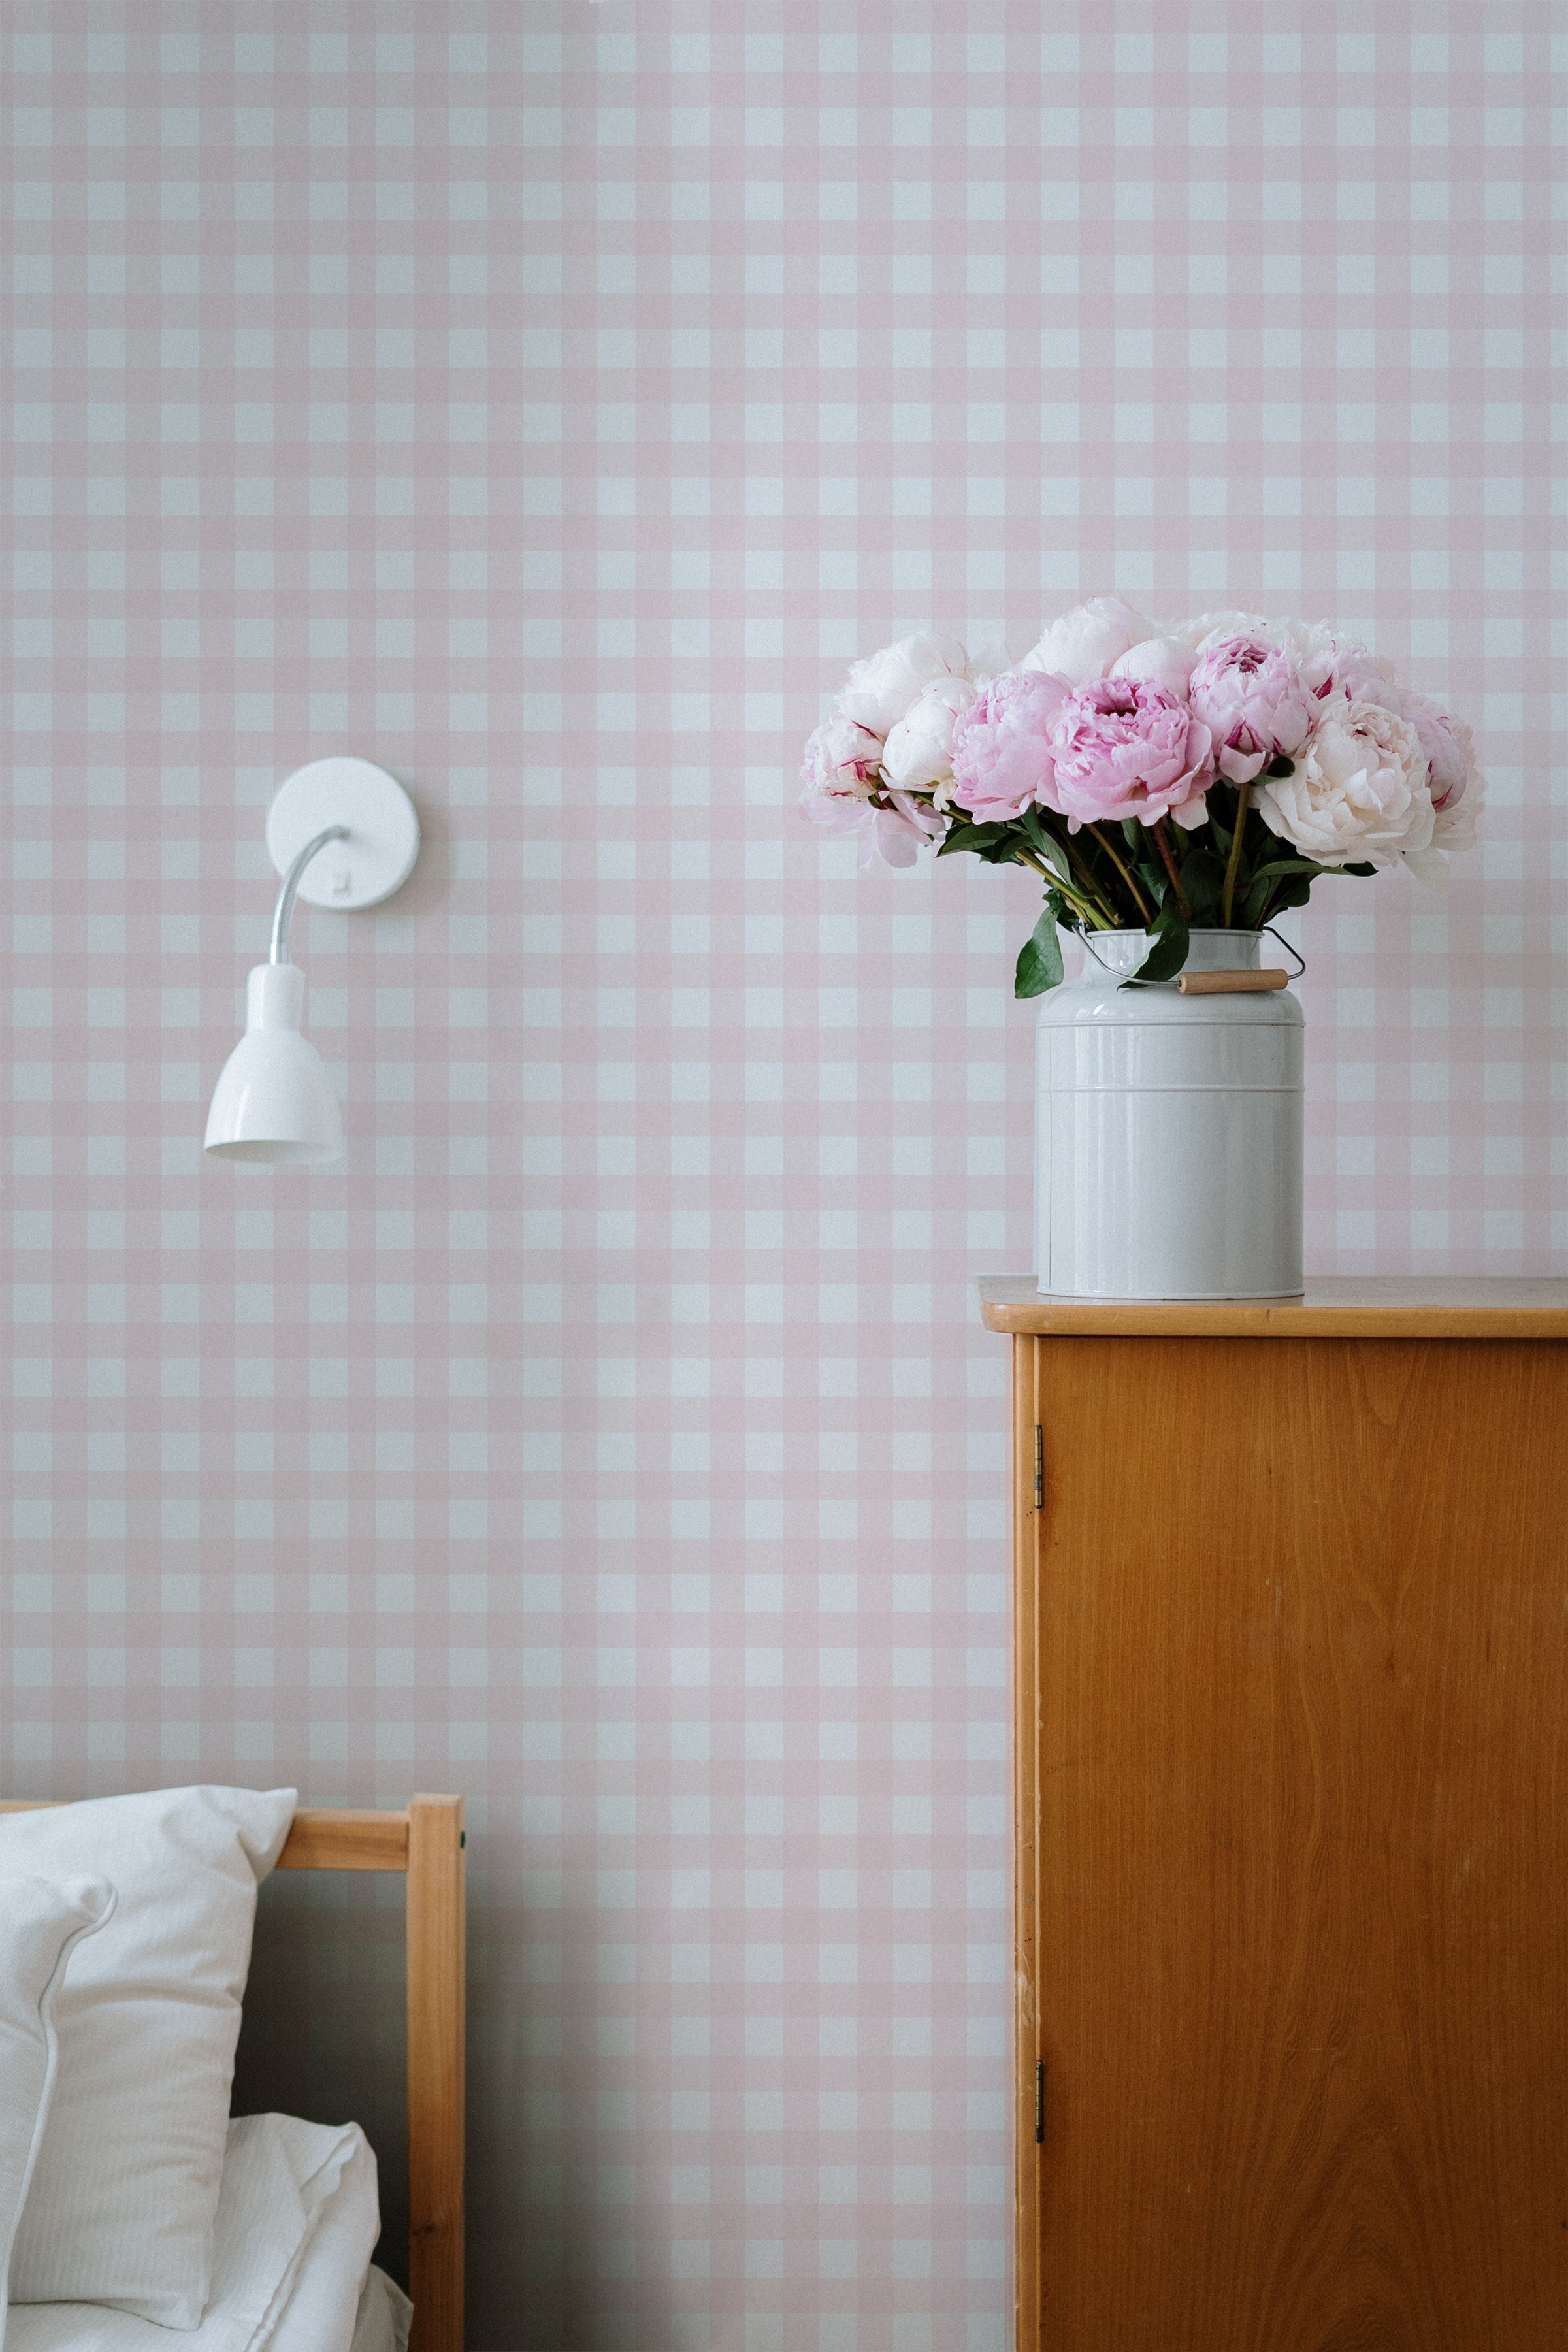 A cozy bedroom corner featuring Gingham Wallpaper in soft pink and white checkered pattern. The wooden bed frame, white pillows, and a wooden dresser with a vase of fresh pink and white flowers complement the wallpaper